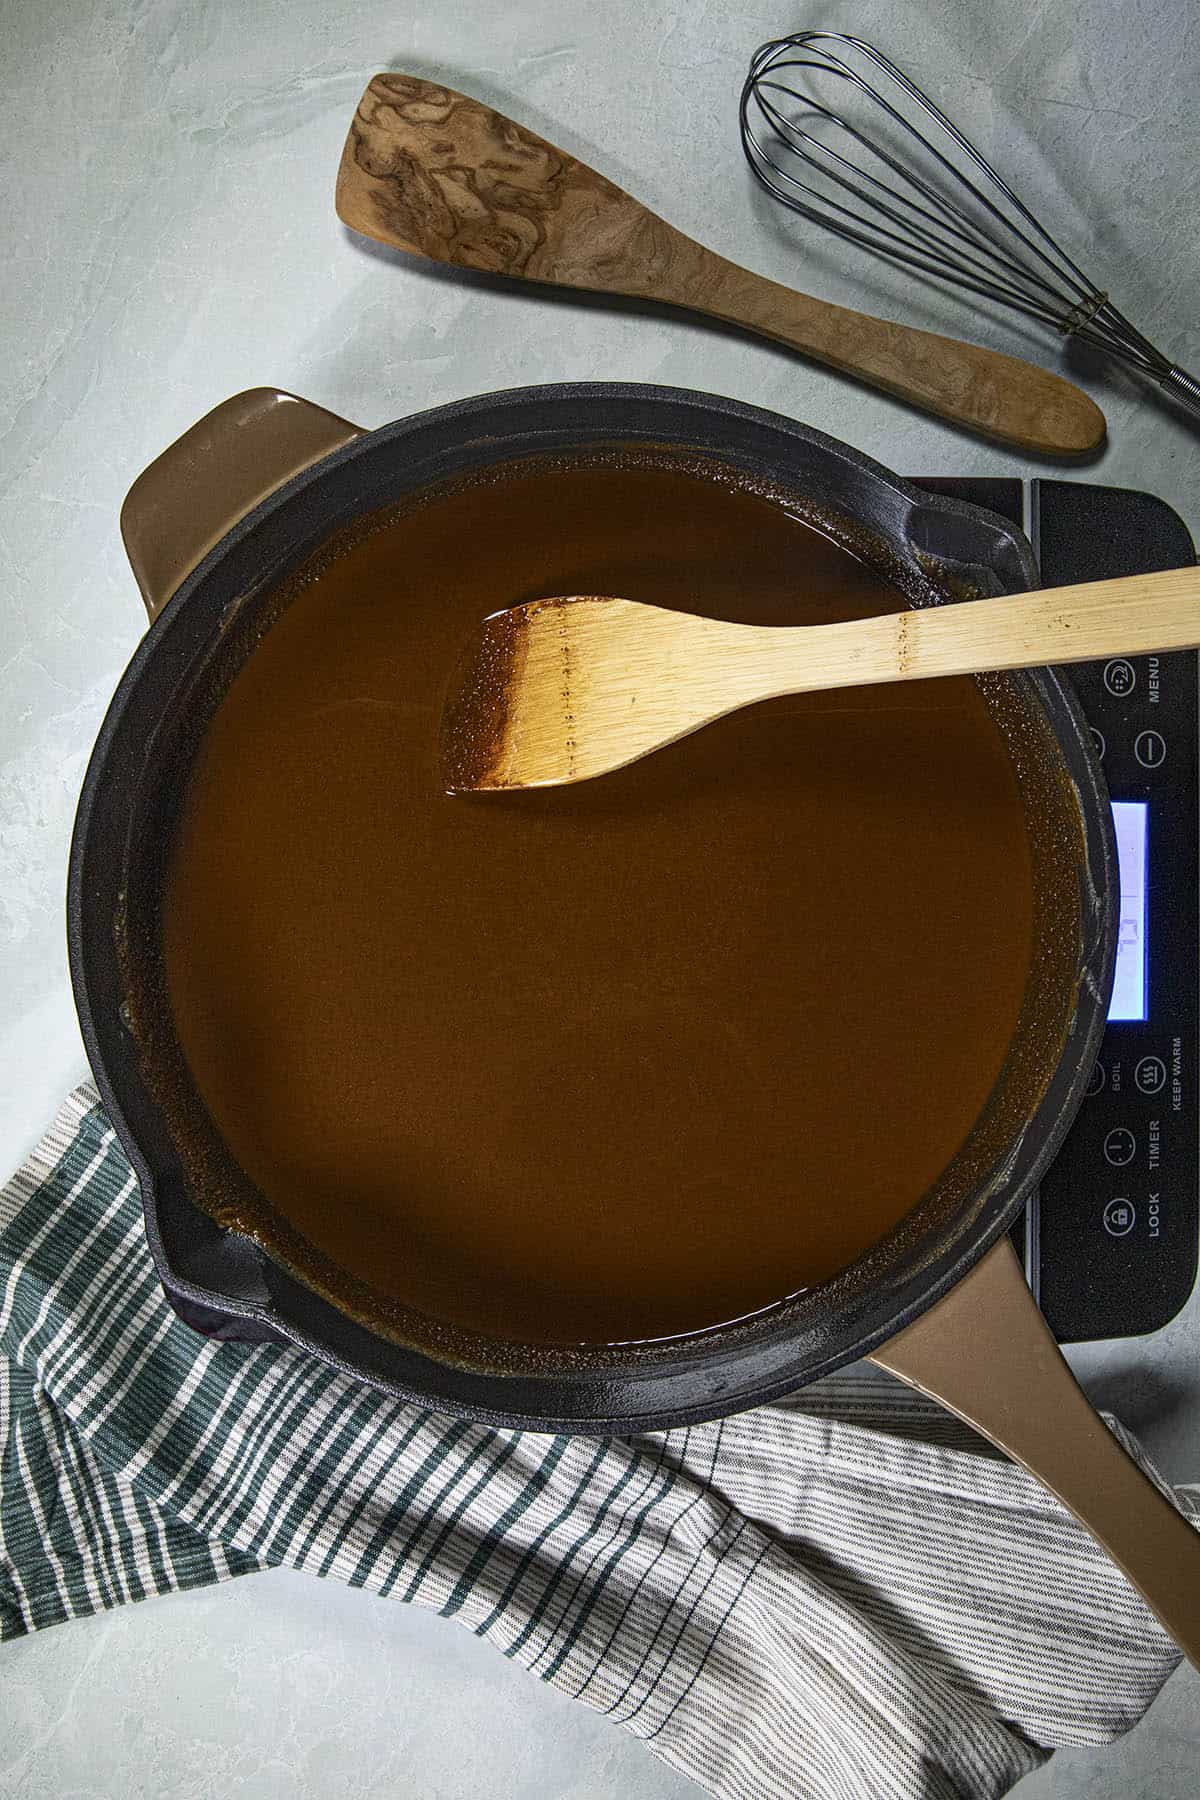 A chocolate colored gumbo roux in a pan